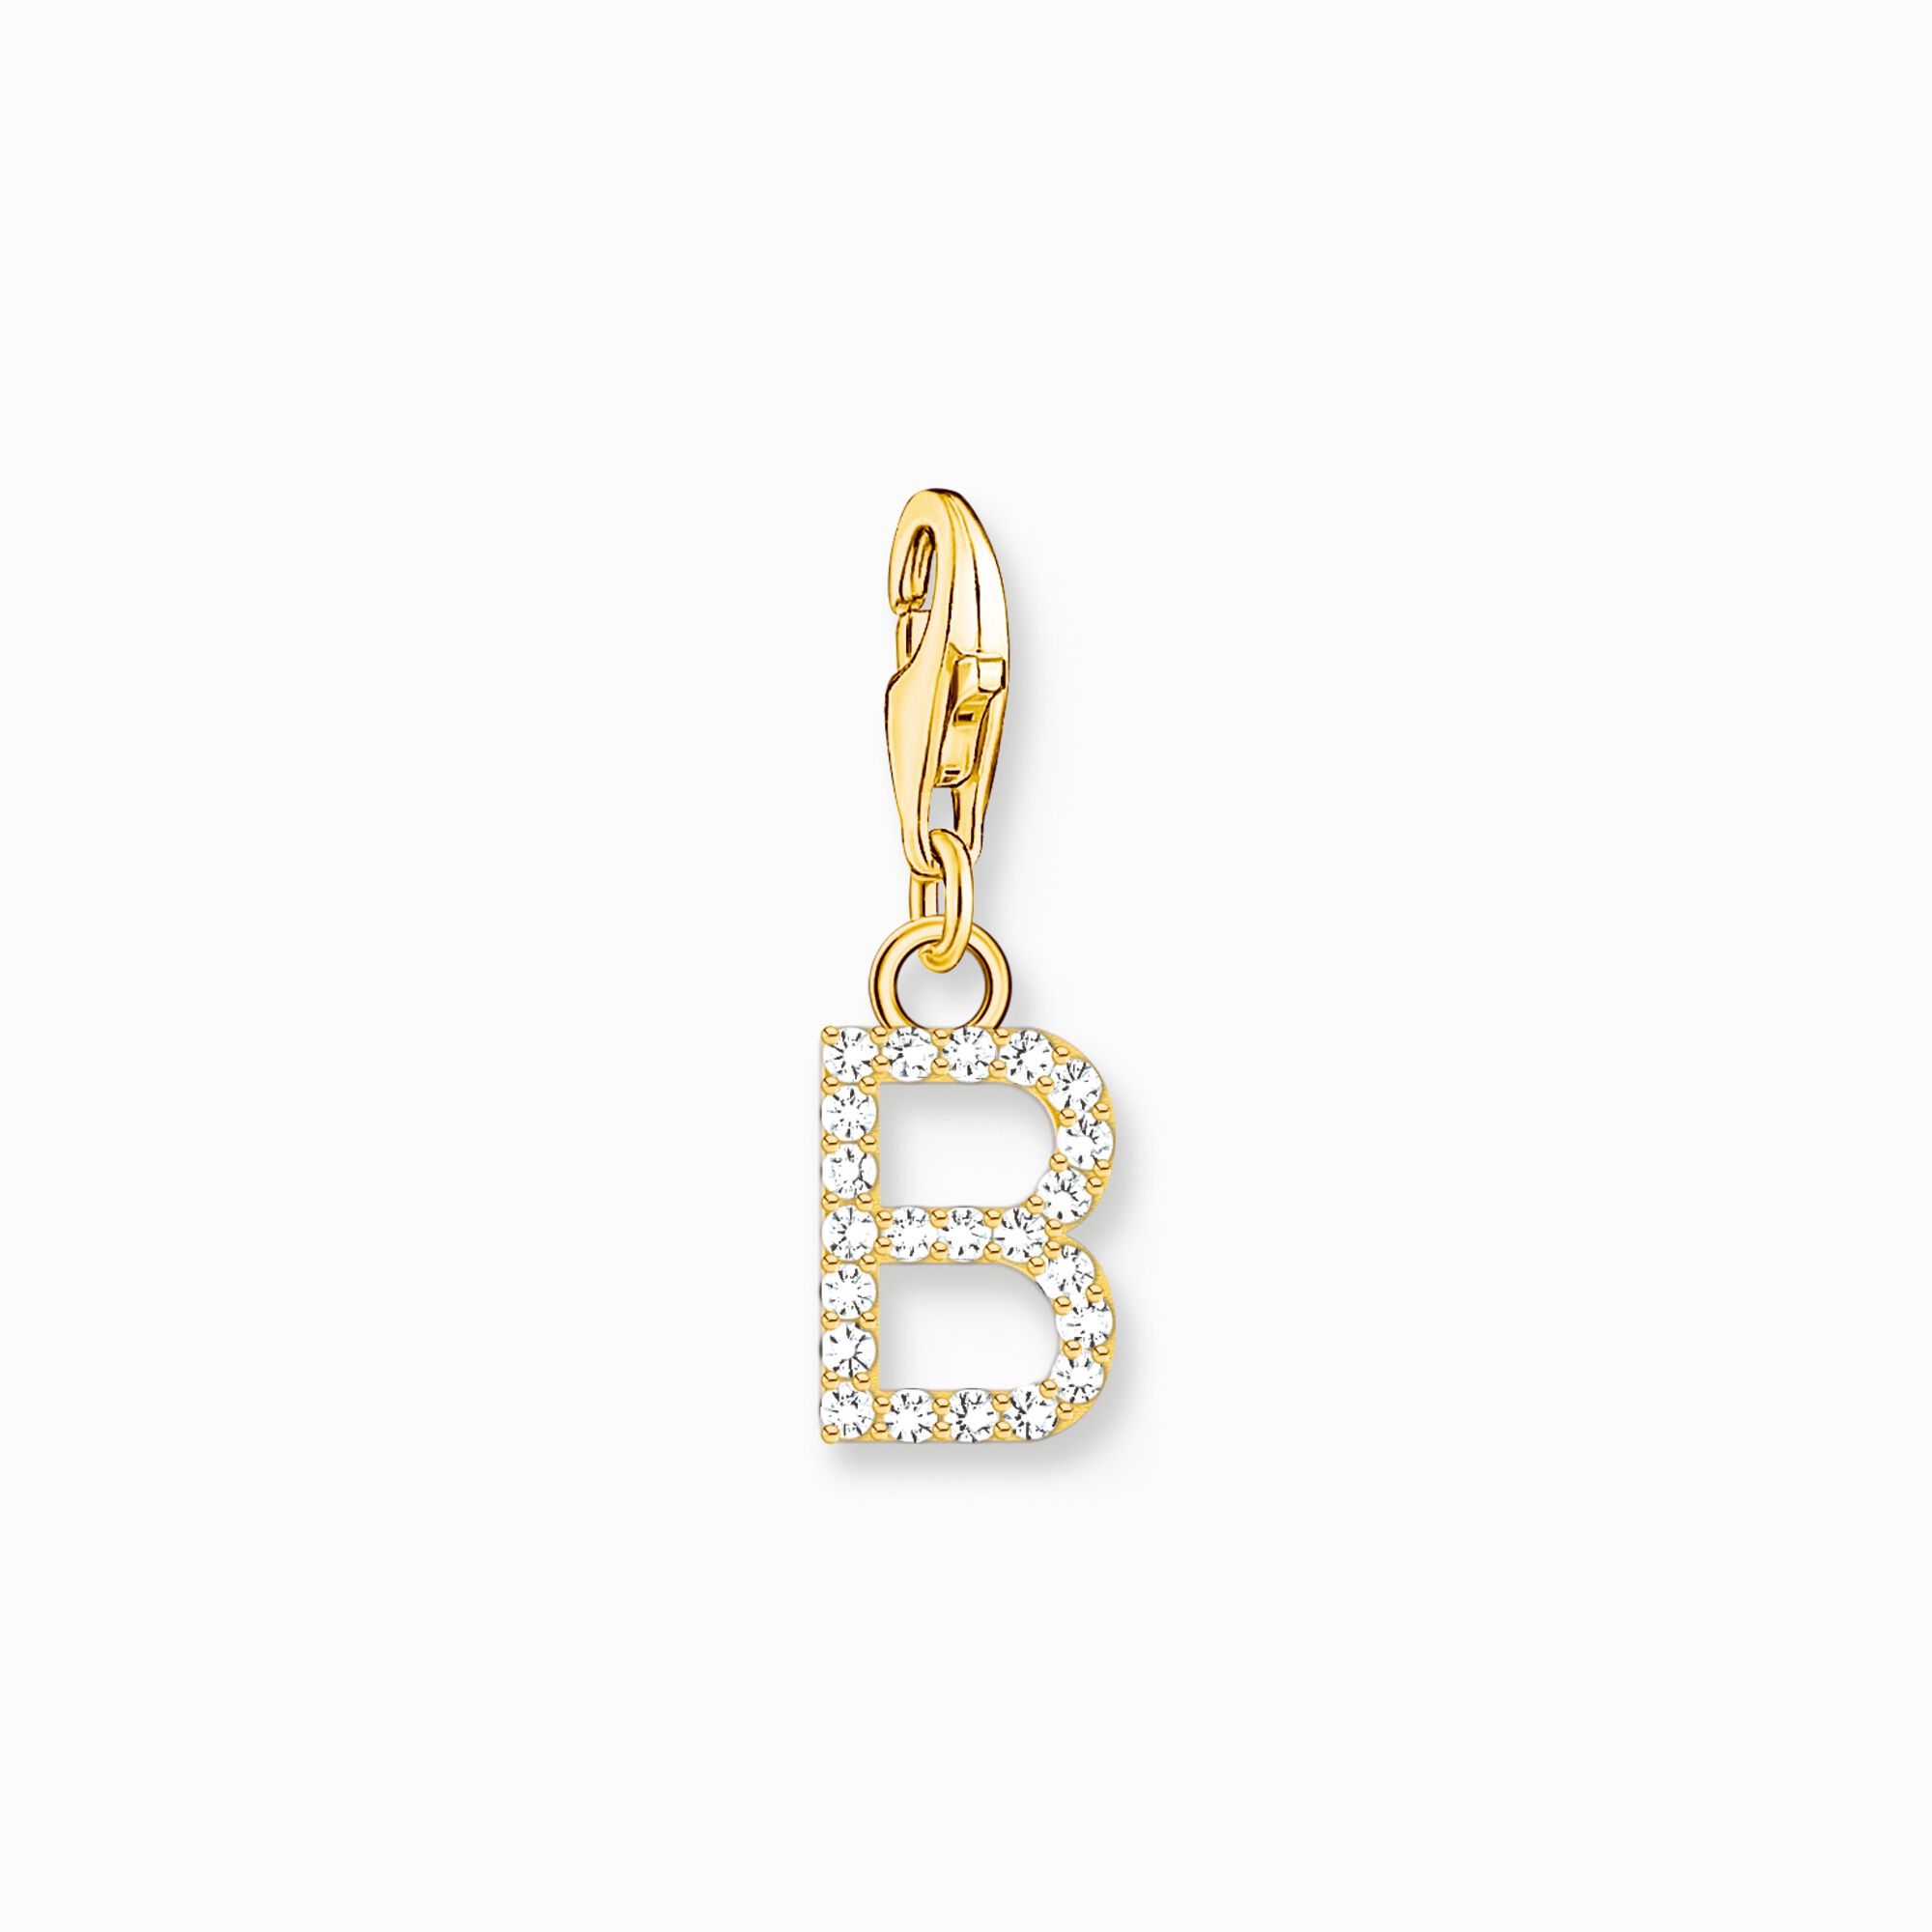 Charm pendant letter B with white stones gold plated from the Charm Club collection in the THOMAS SABO online store